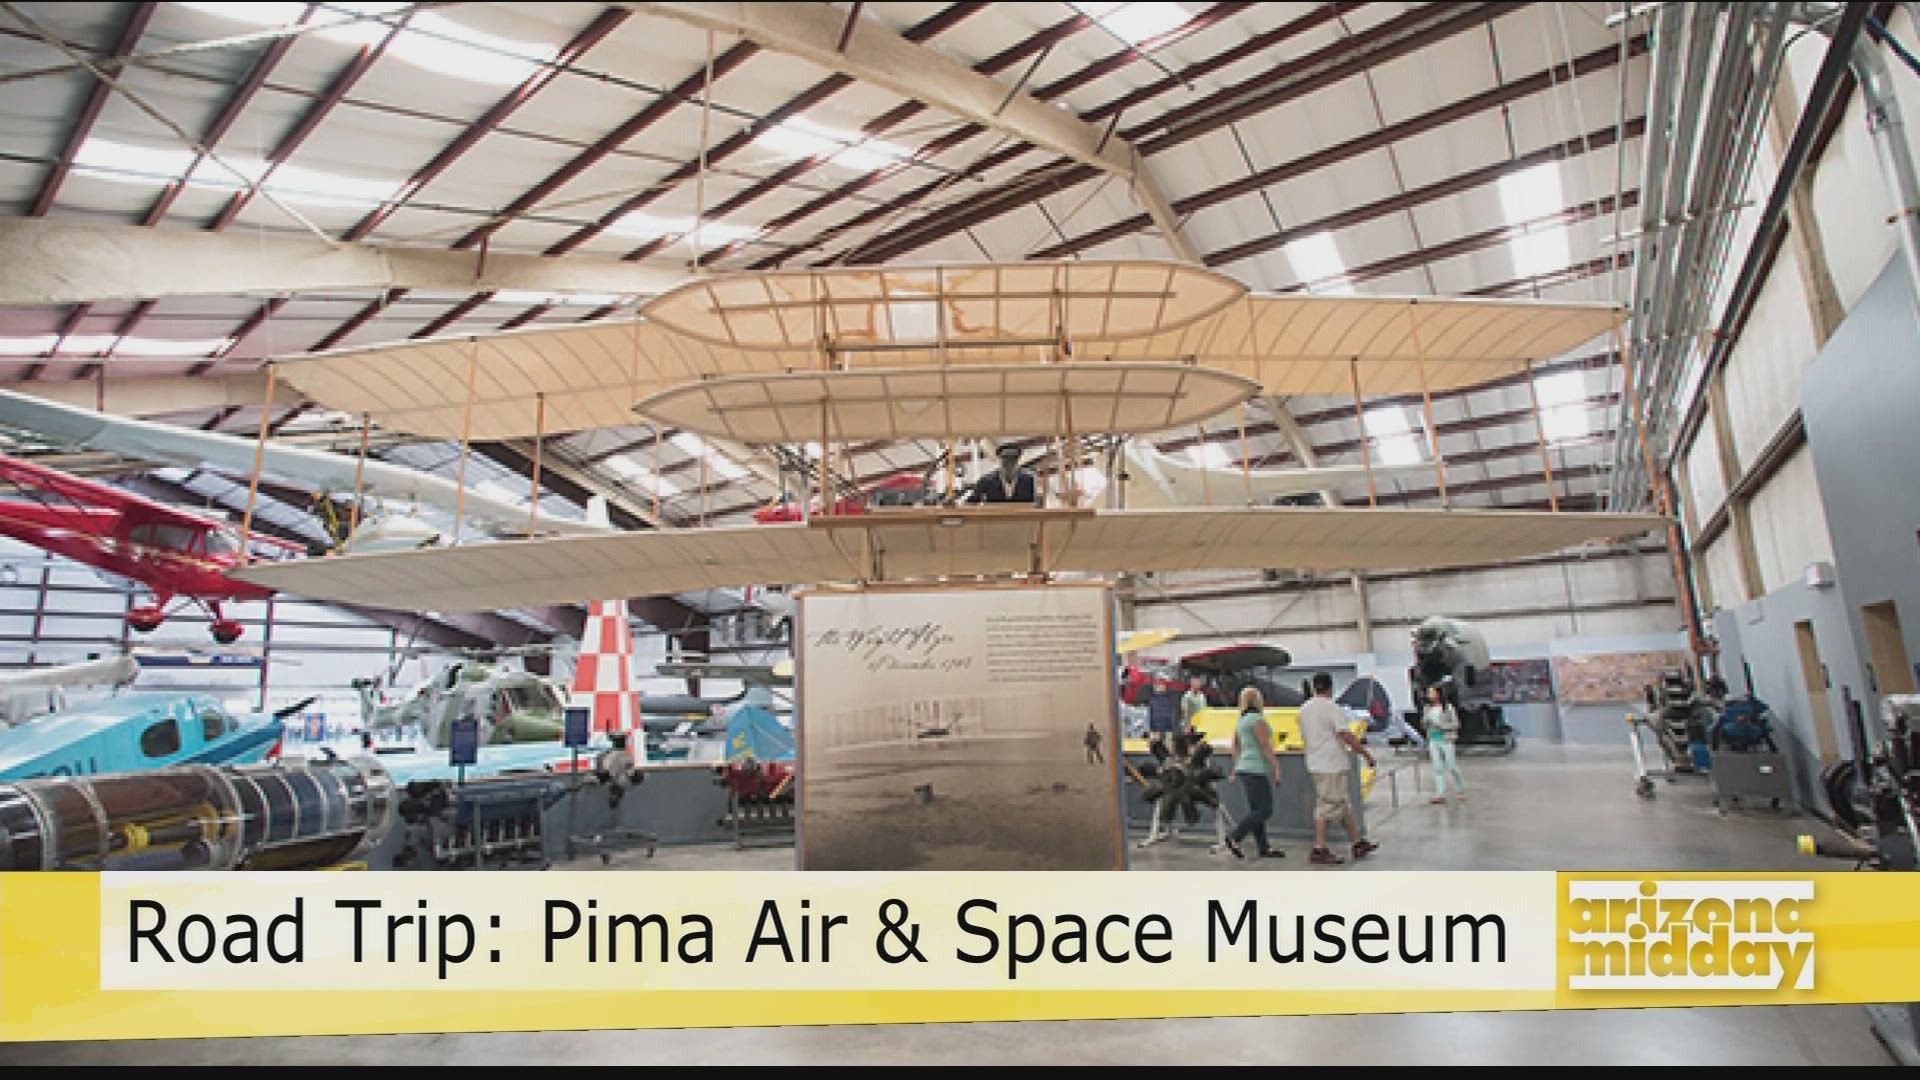 Planes, helicopters and space capsules! Brad Elliot tells us why we should hit the road and check out the Pima Air & Space Museum.